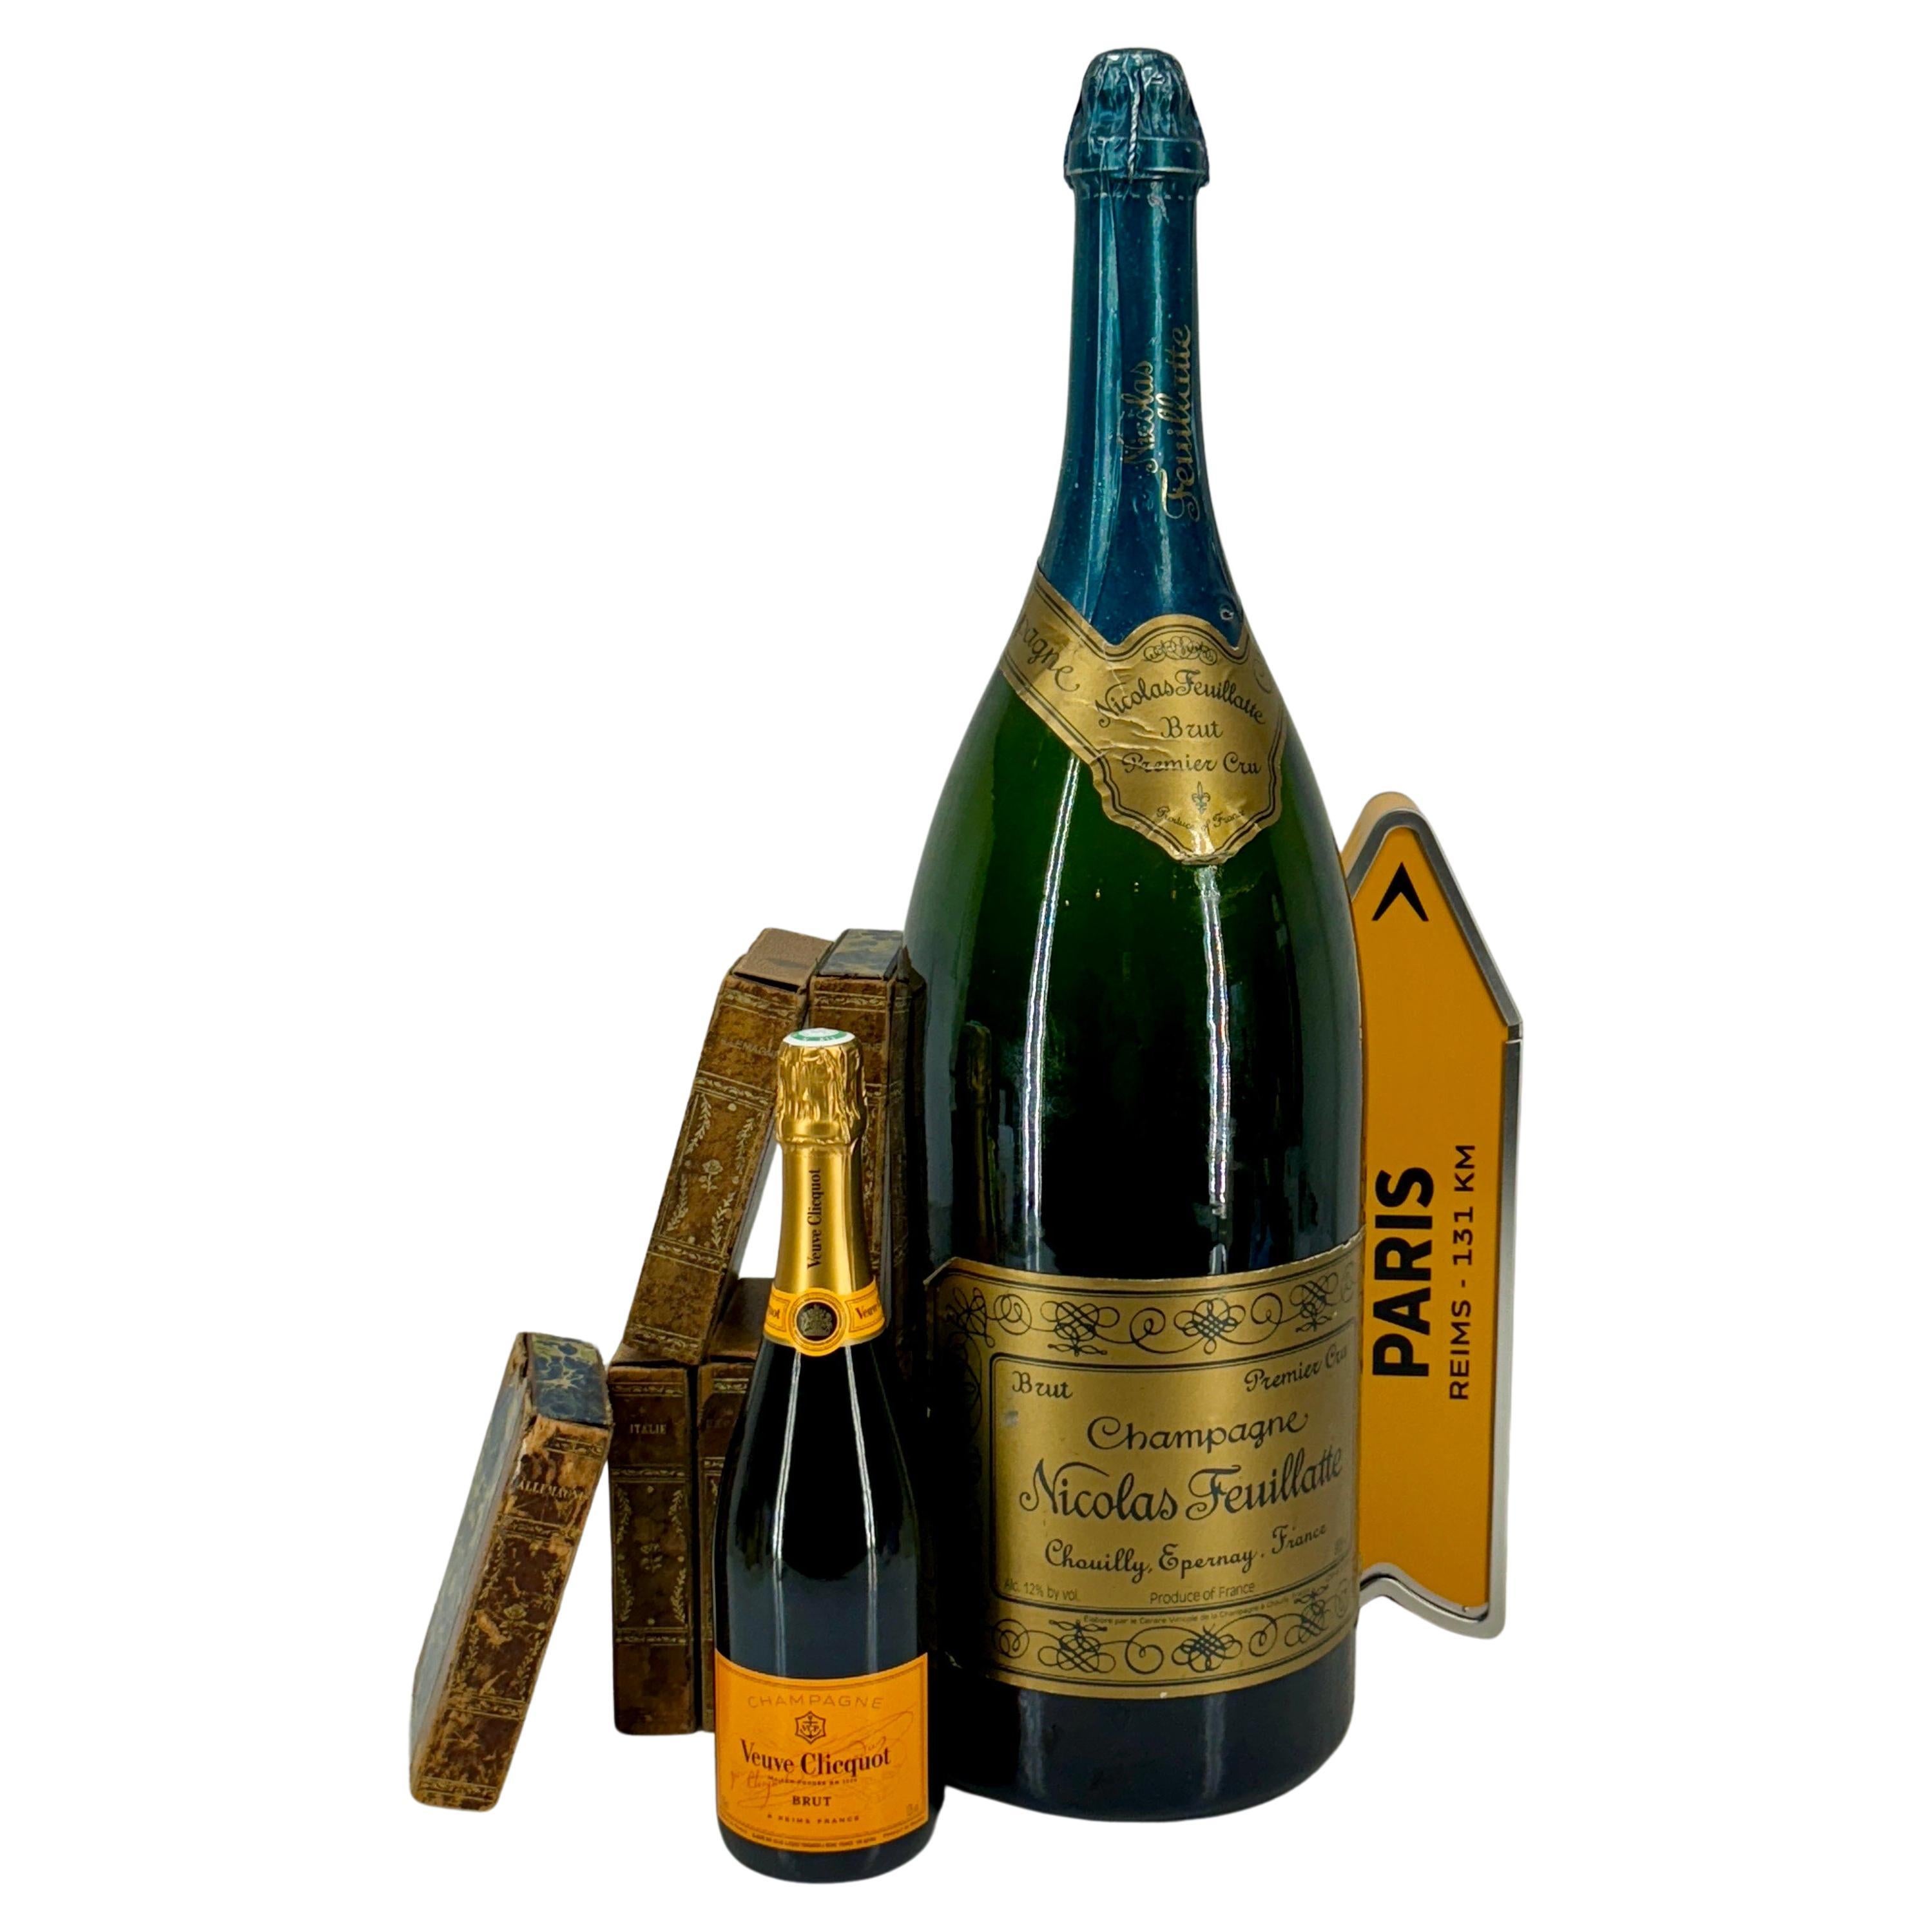 Nicolas Feuillatte Vintage Oversized Magnum Champagne Bottle Prop Sculpture, France 

Substantial and larger vintage champagne bottle made of solid glass material. This piece would certainly make a statement either in a home setting on a bar or bar